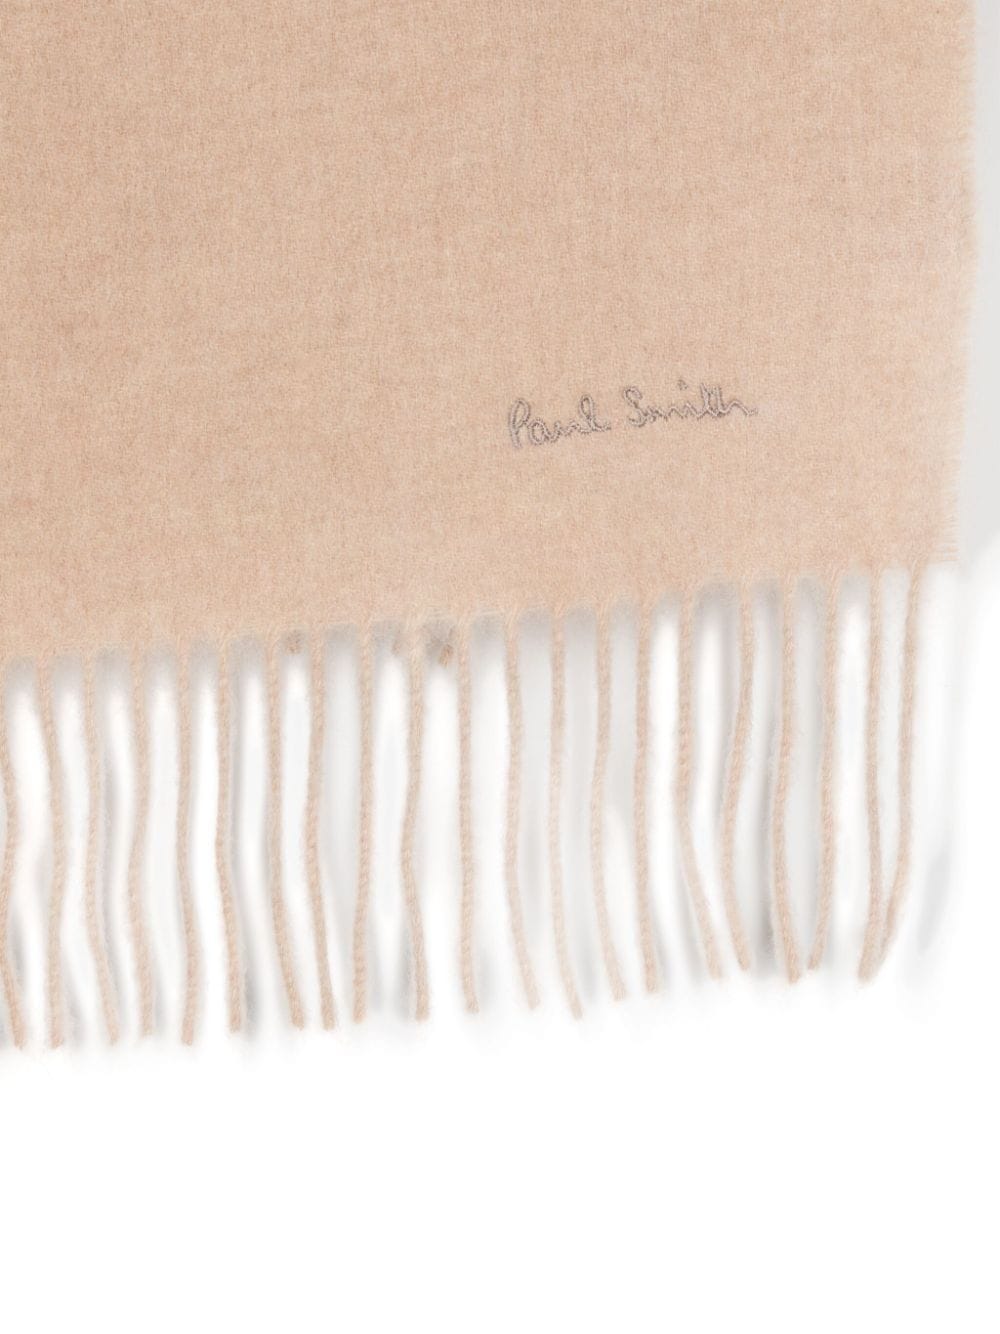 Paul Smith logo-embroidered cashmere scarf - Beige